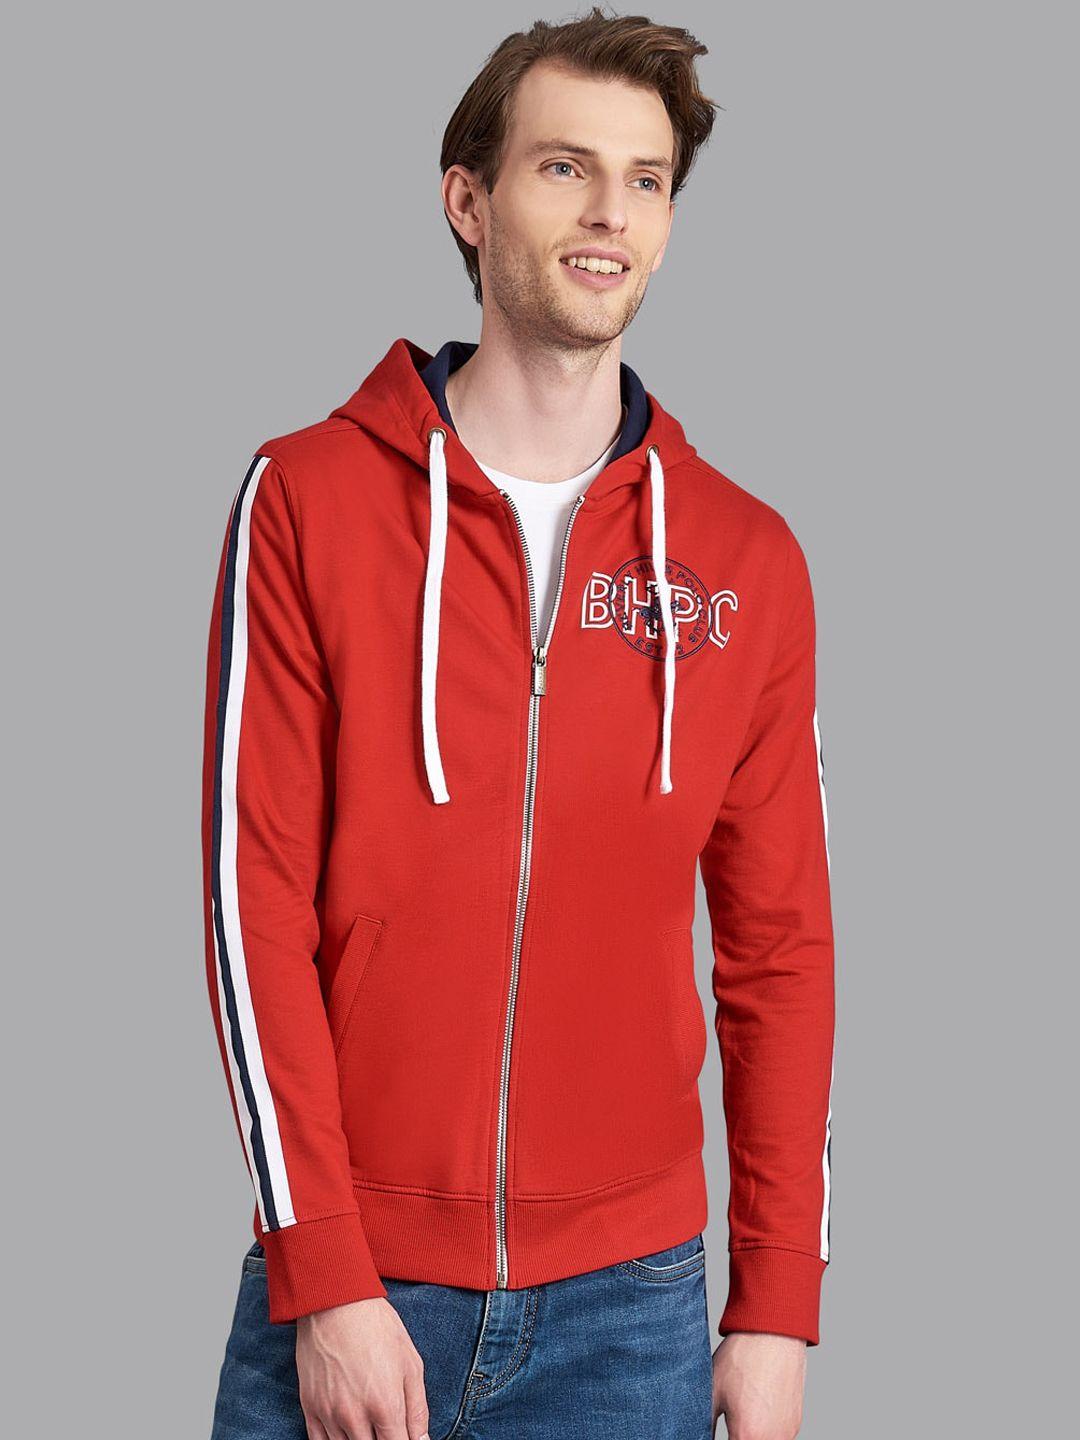 beverly hills polo club men red cotton hooded sweatshirt